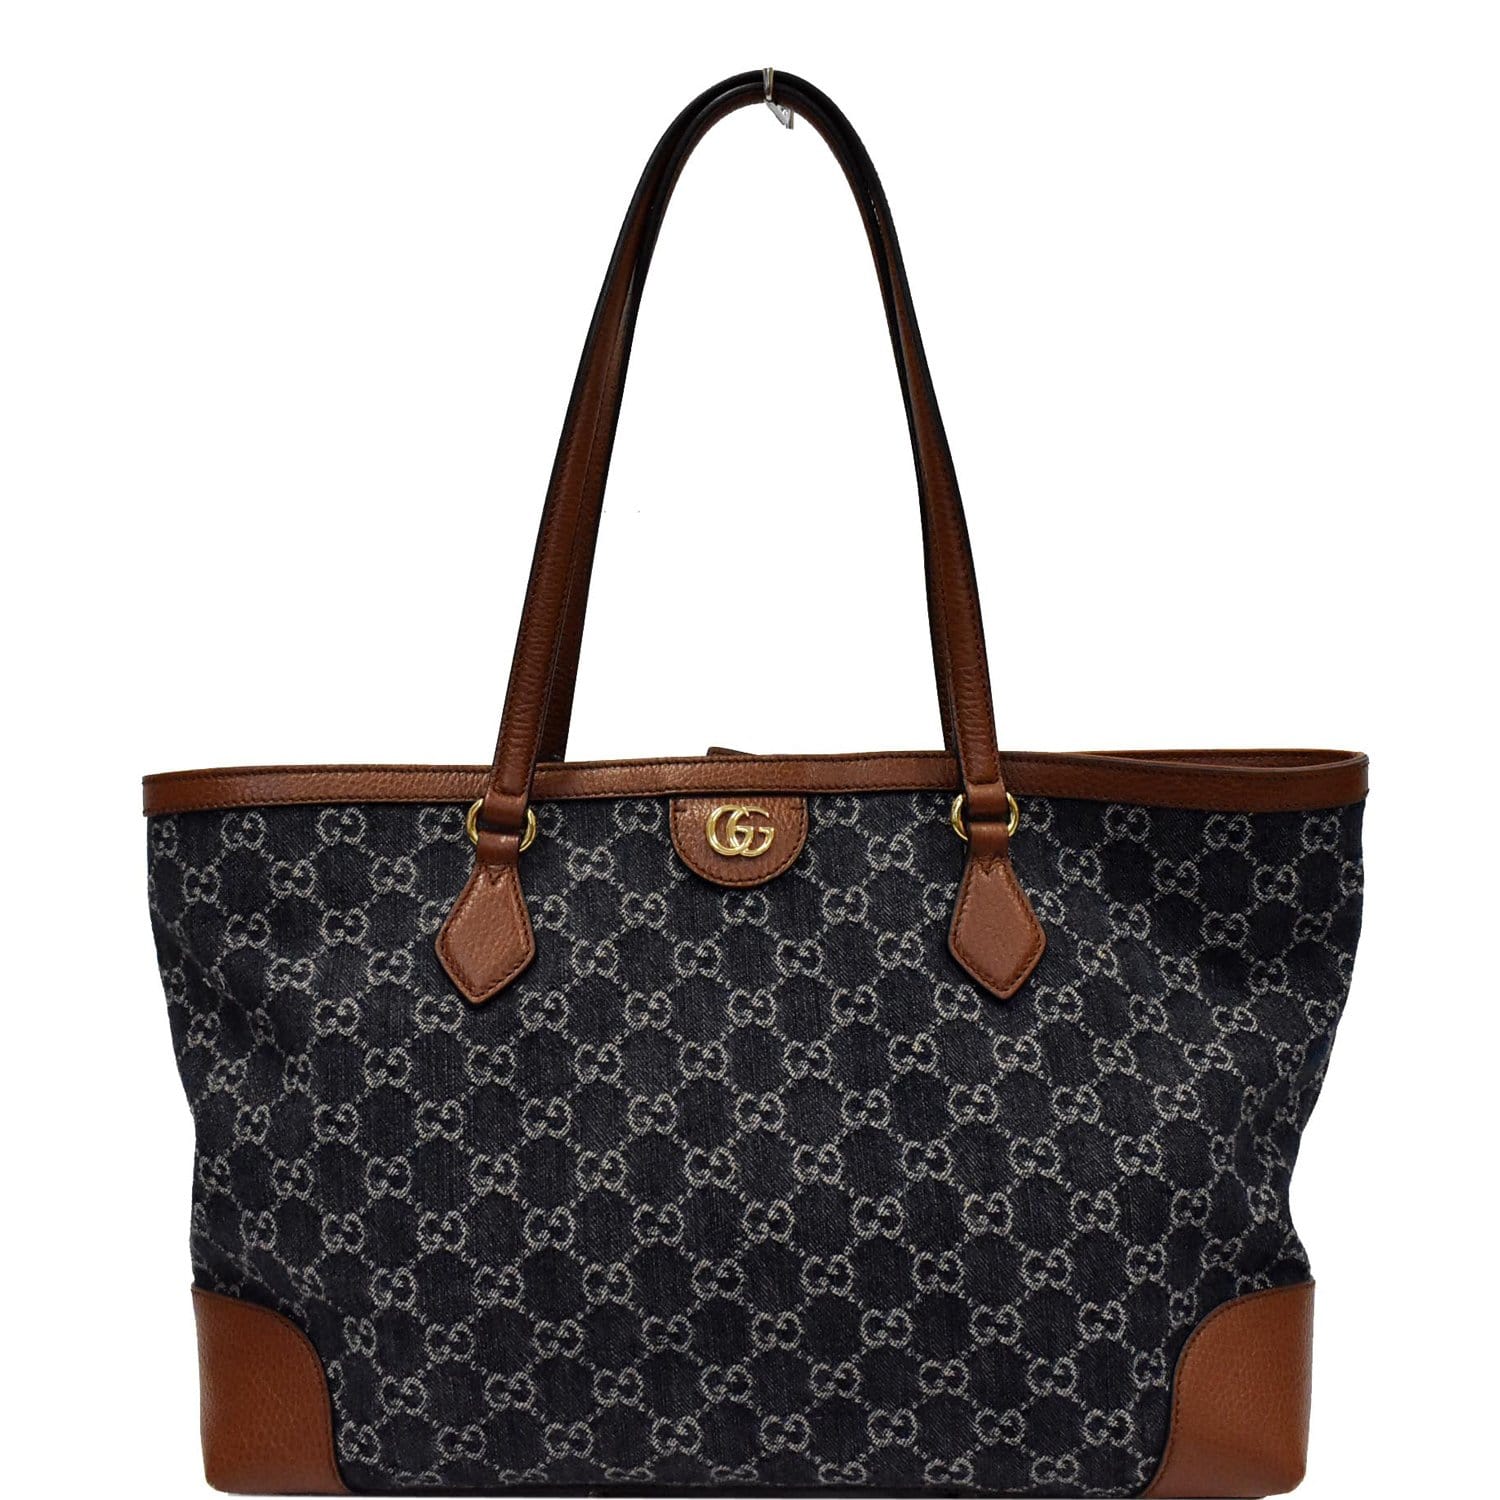 Authentic Gucci Jacquard Extra Large Tote